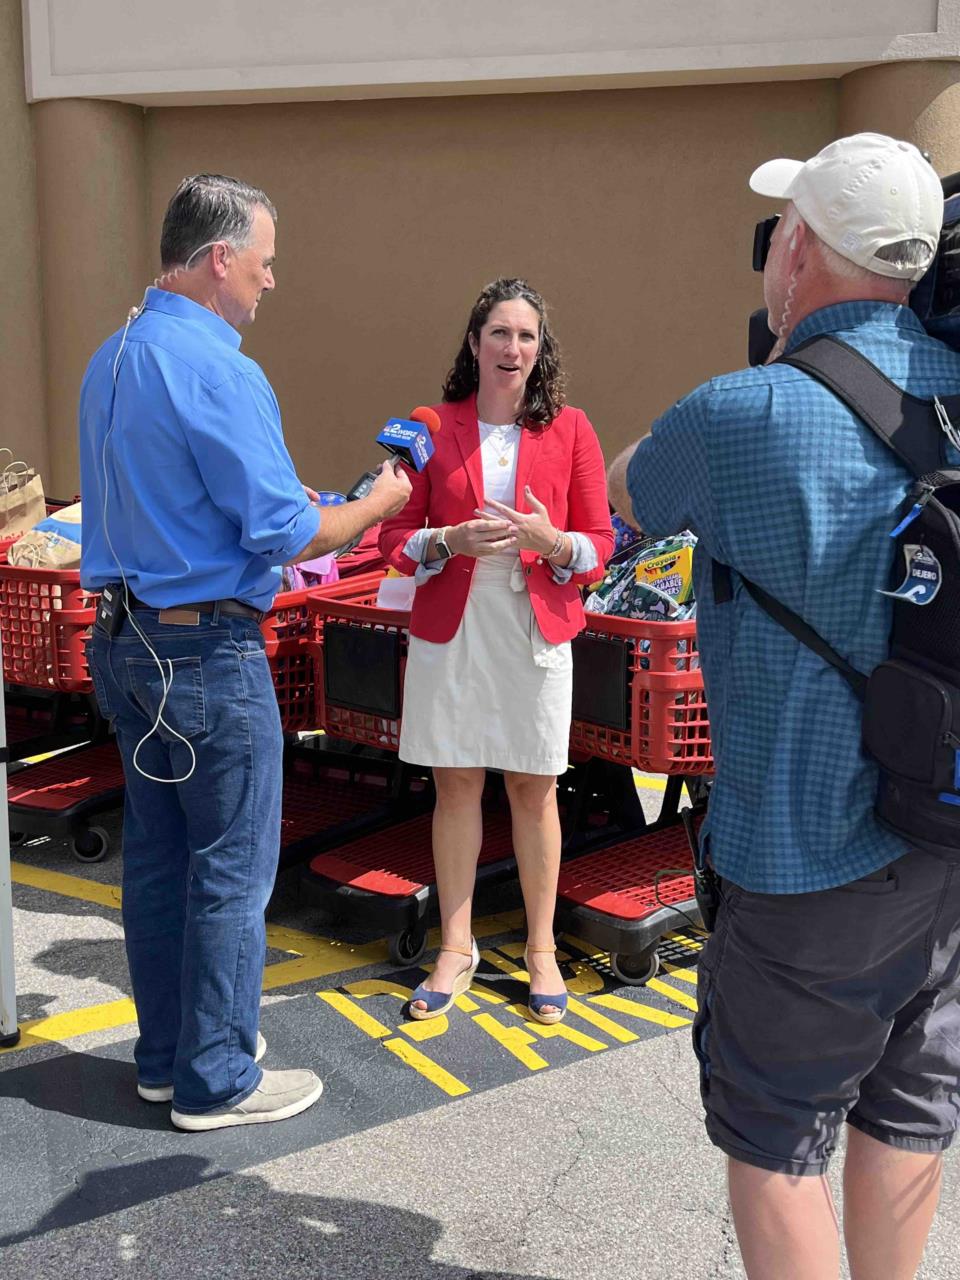 The backpack collection drive was coordinated by Meghan Dwyer, who was interviewed on WGRZ about Barclay Damon’s participation.